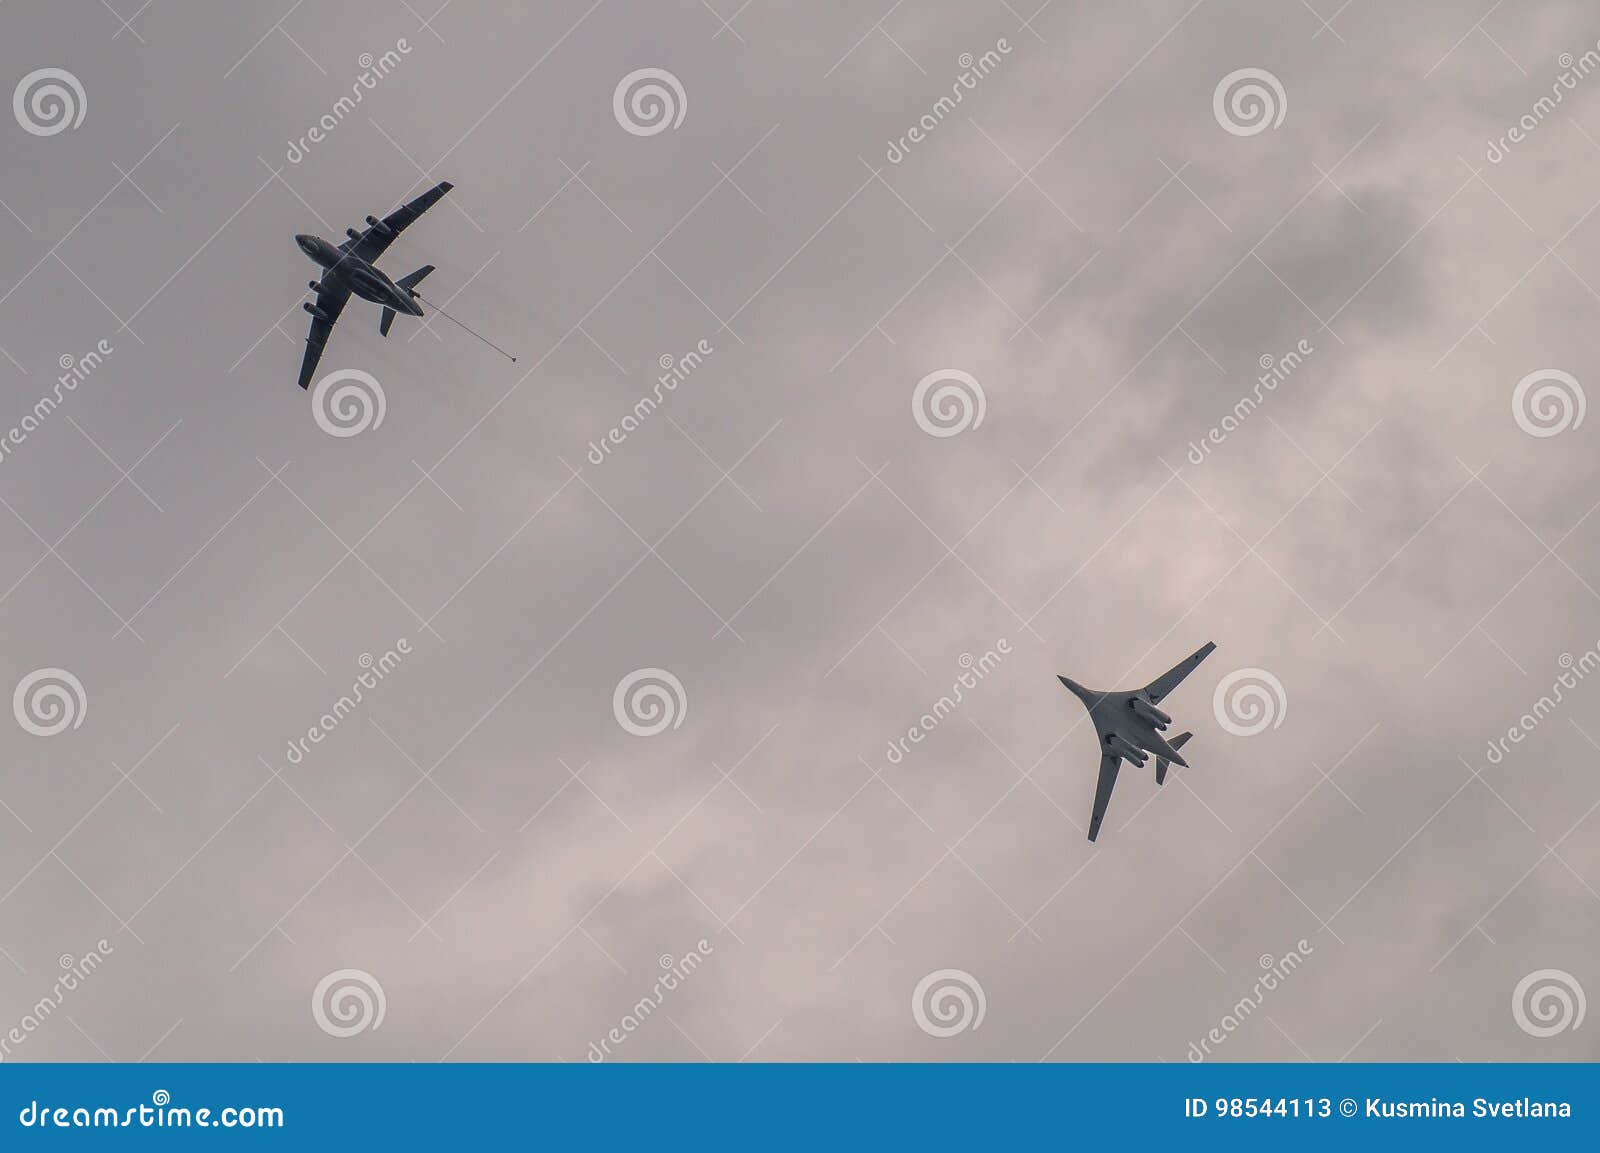 the russian tu-160 bomber during a training flight with refueling in the air in central russia.